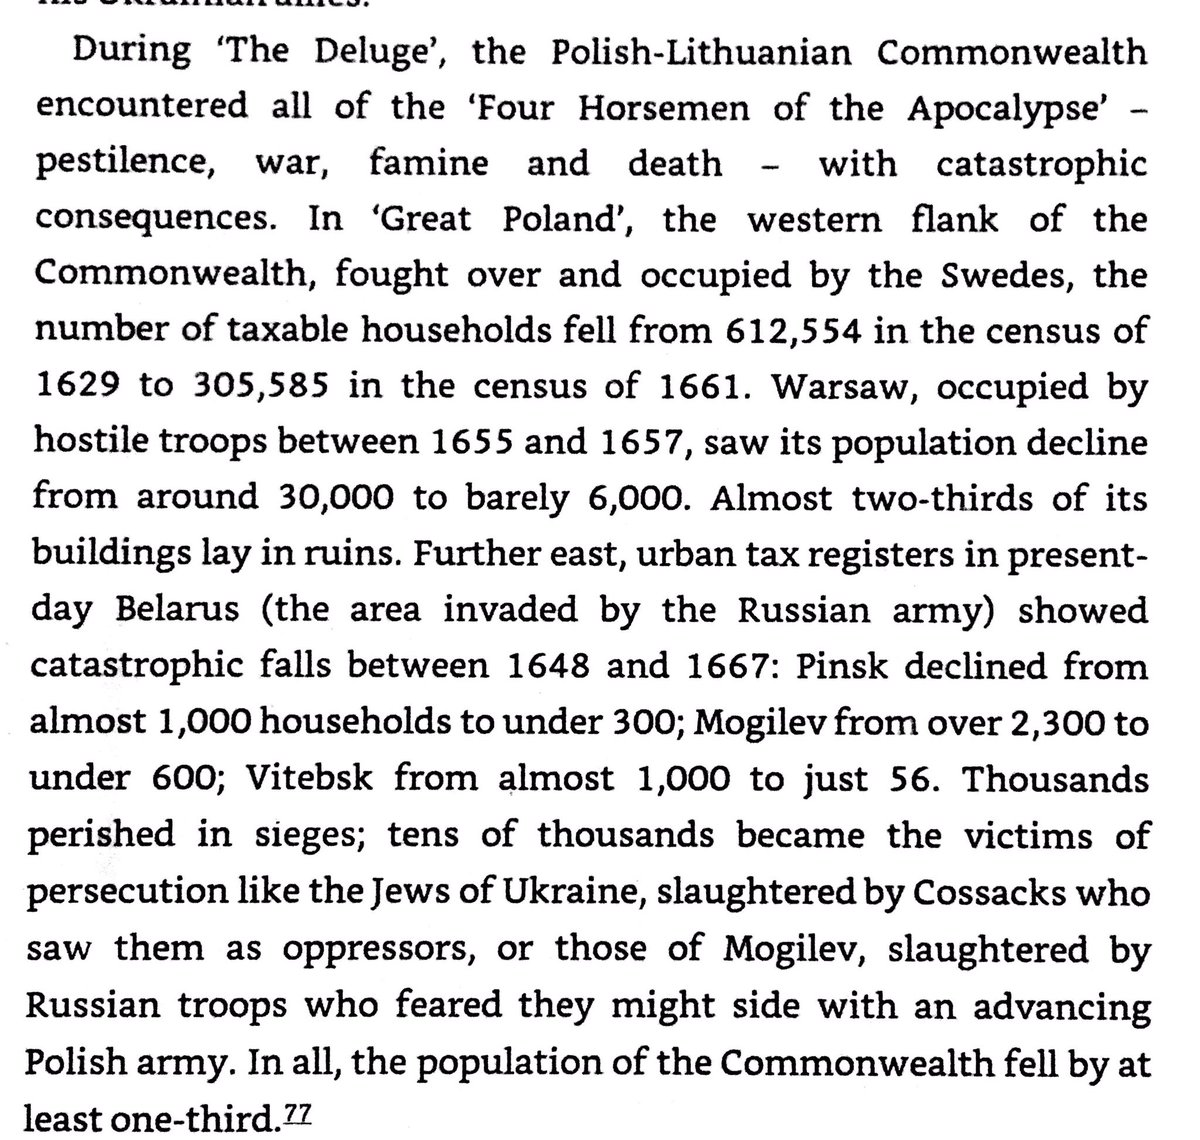 Sweden, Ukraine, & Russia devastated Poland in “The Deluge” of the mid-17th century. Overall Polish population fell by 1/3, & cities were depopulated.